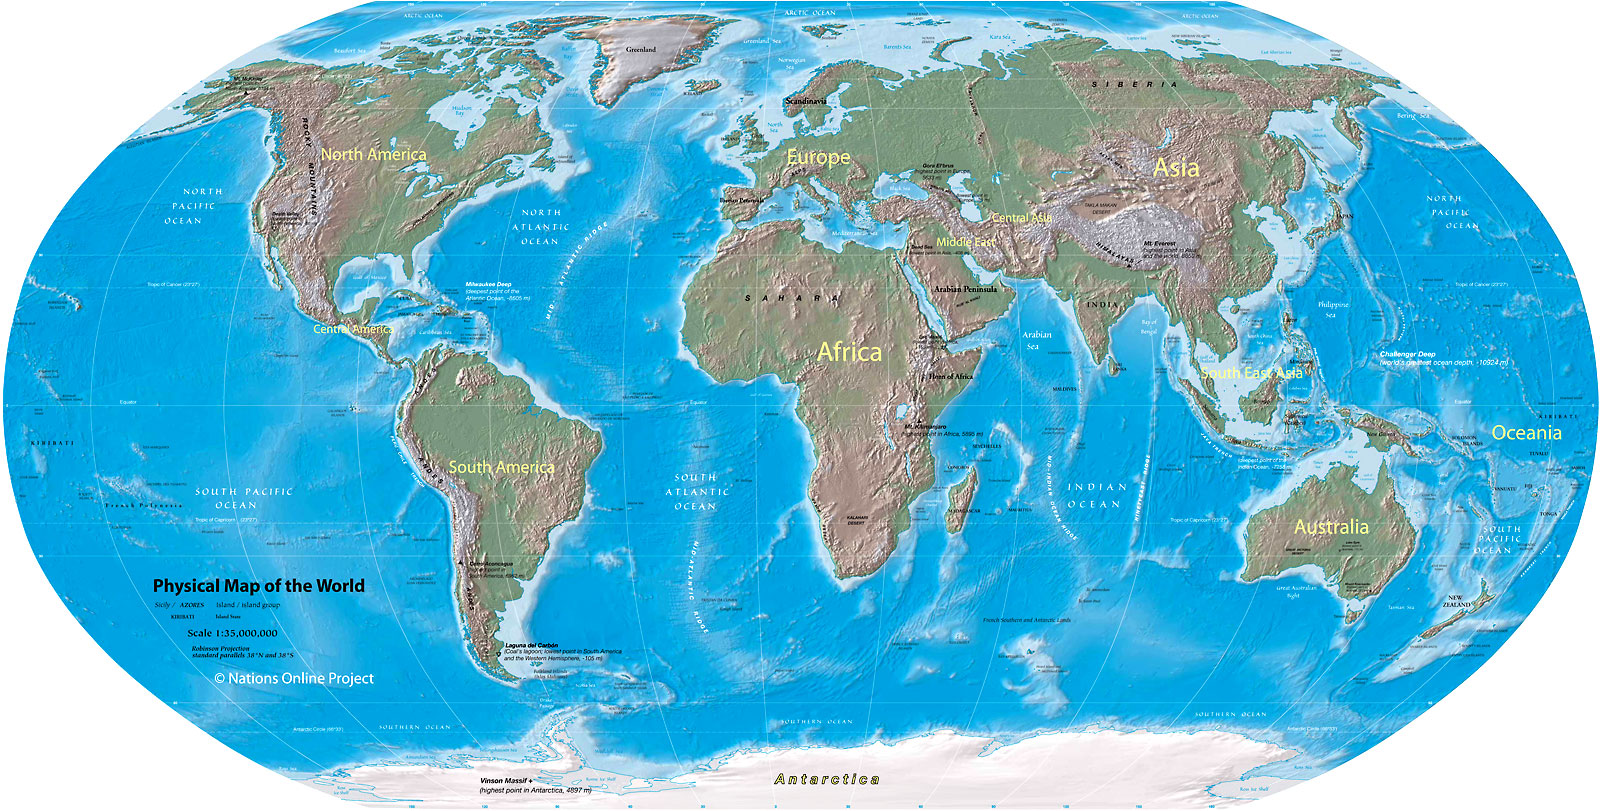 physical map of the world with oceans World Map Physical Map Of The World Nations Online Project physical map of the world with oceans